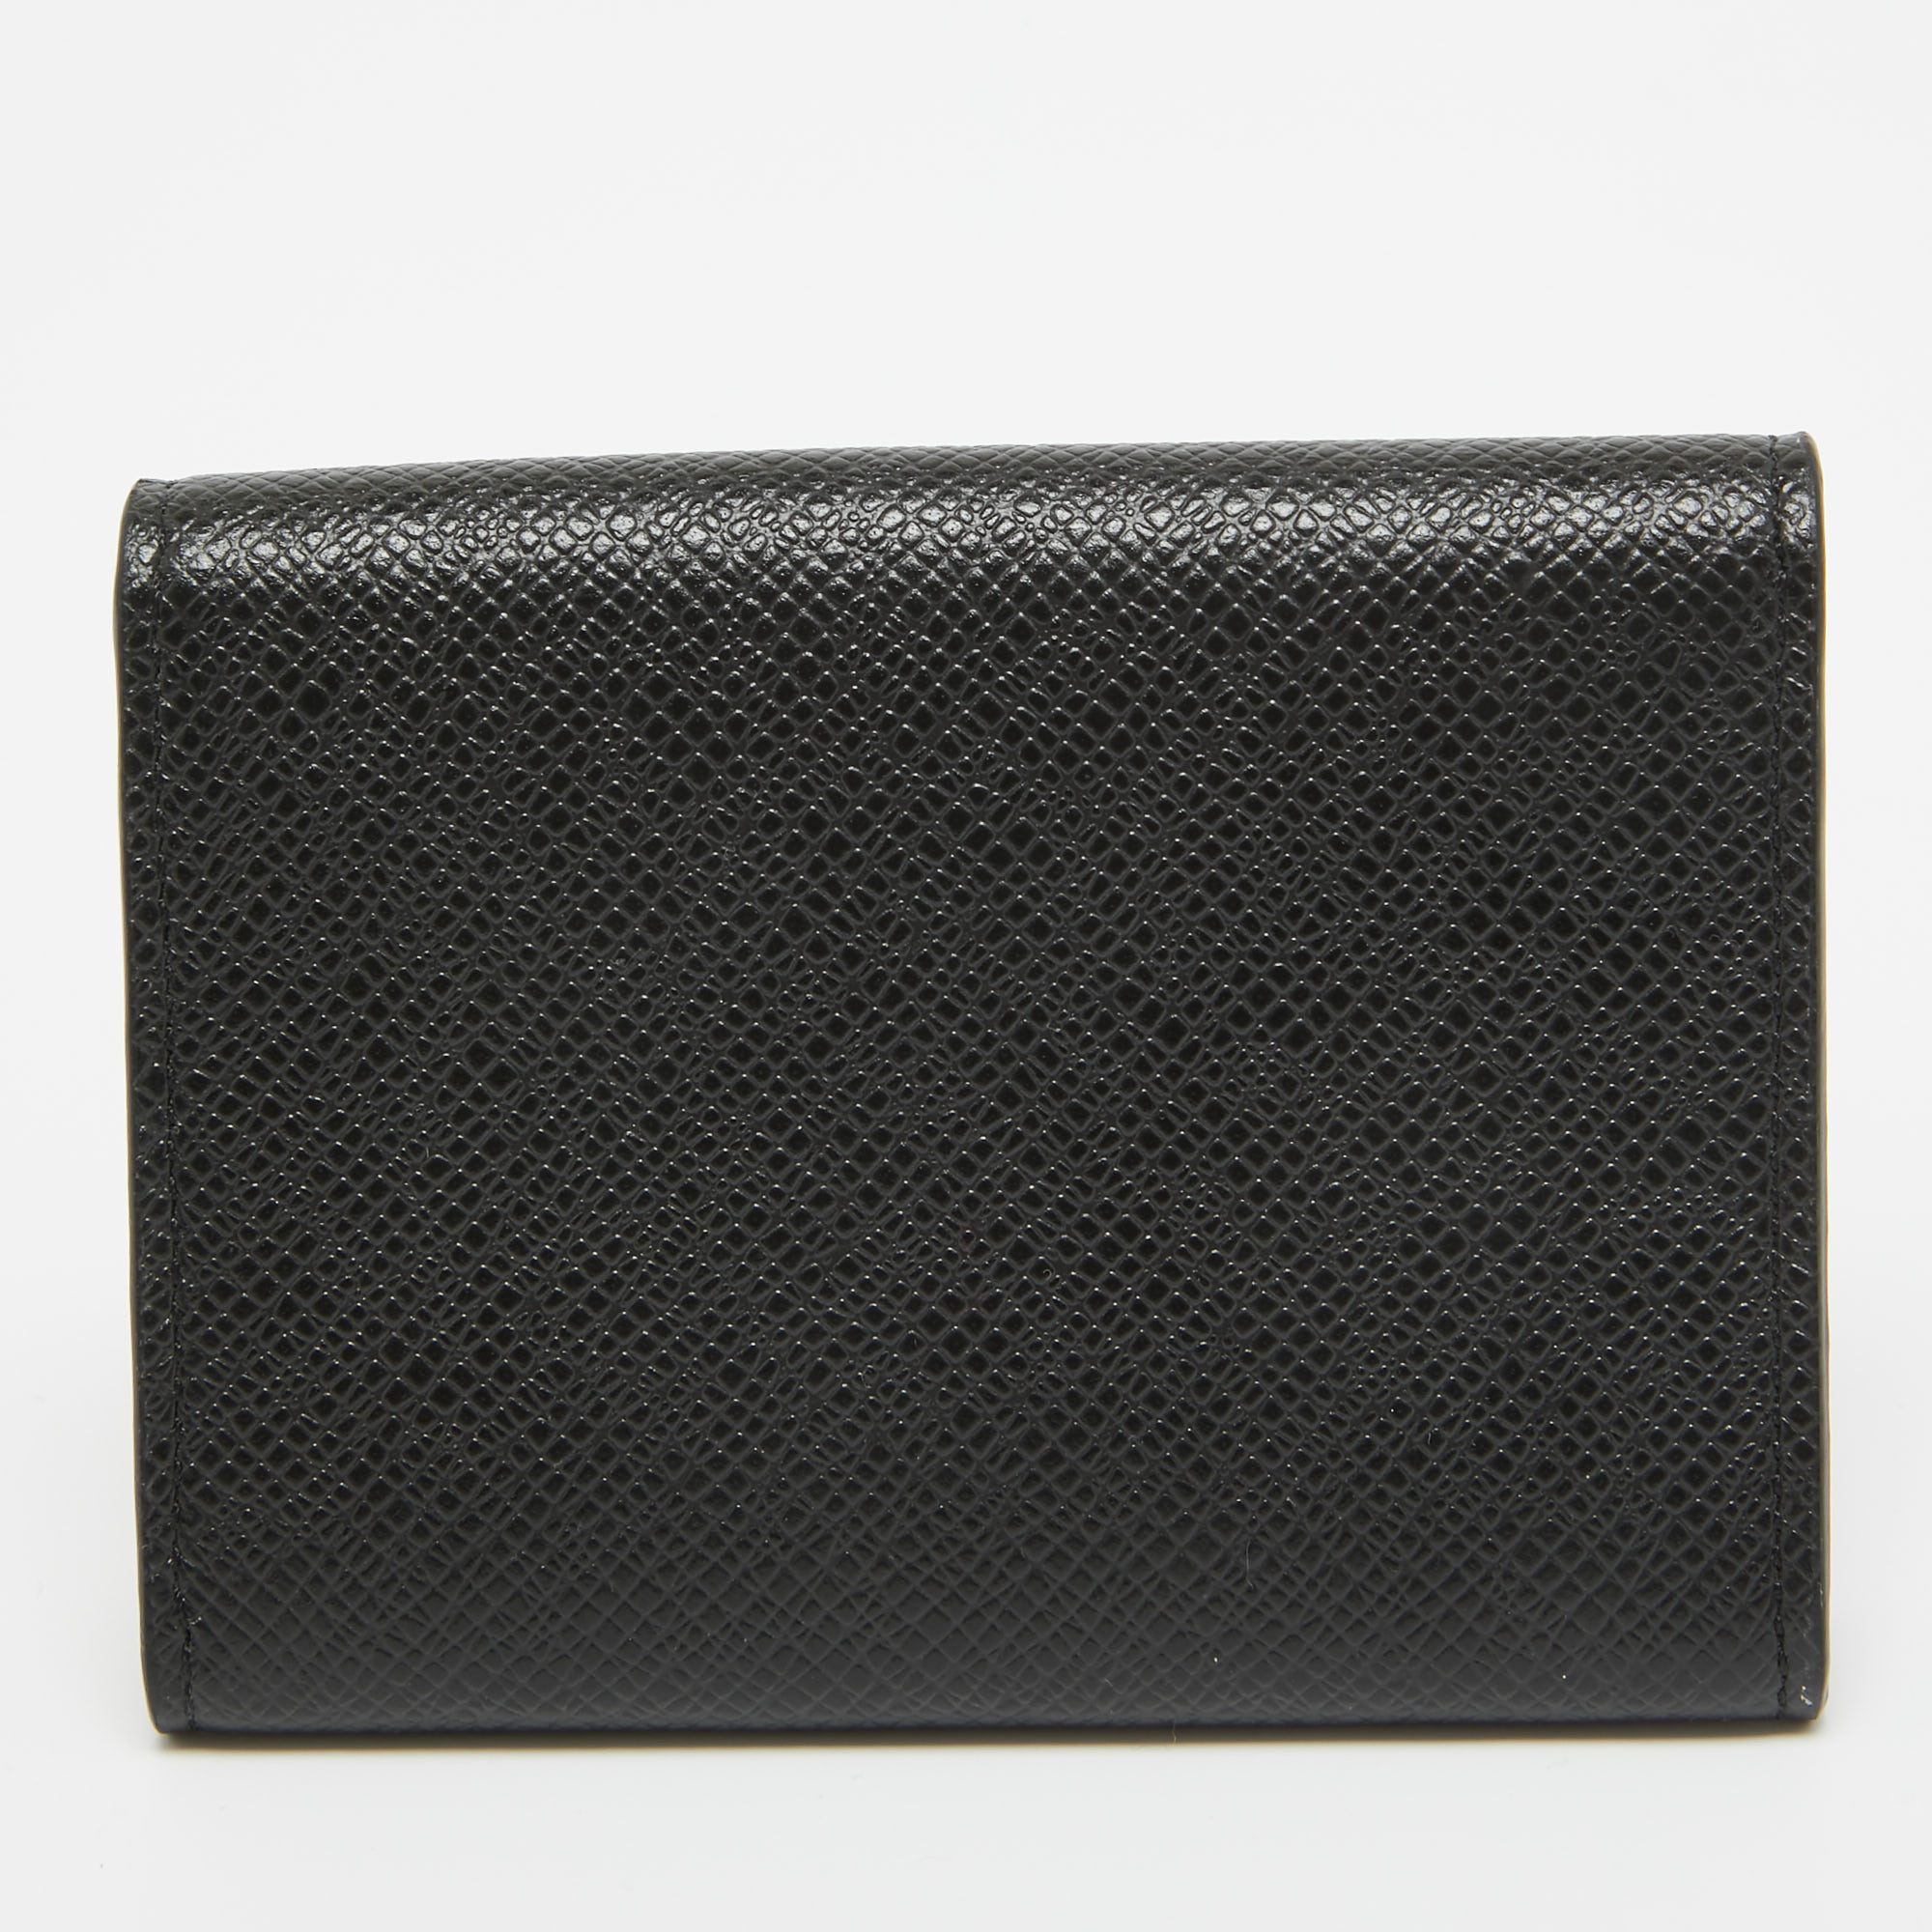 This stylish and functional Louis Vuitton cardholder is a must have in your collection. It is equipped with multiple well lined slots to hold your cards.